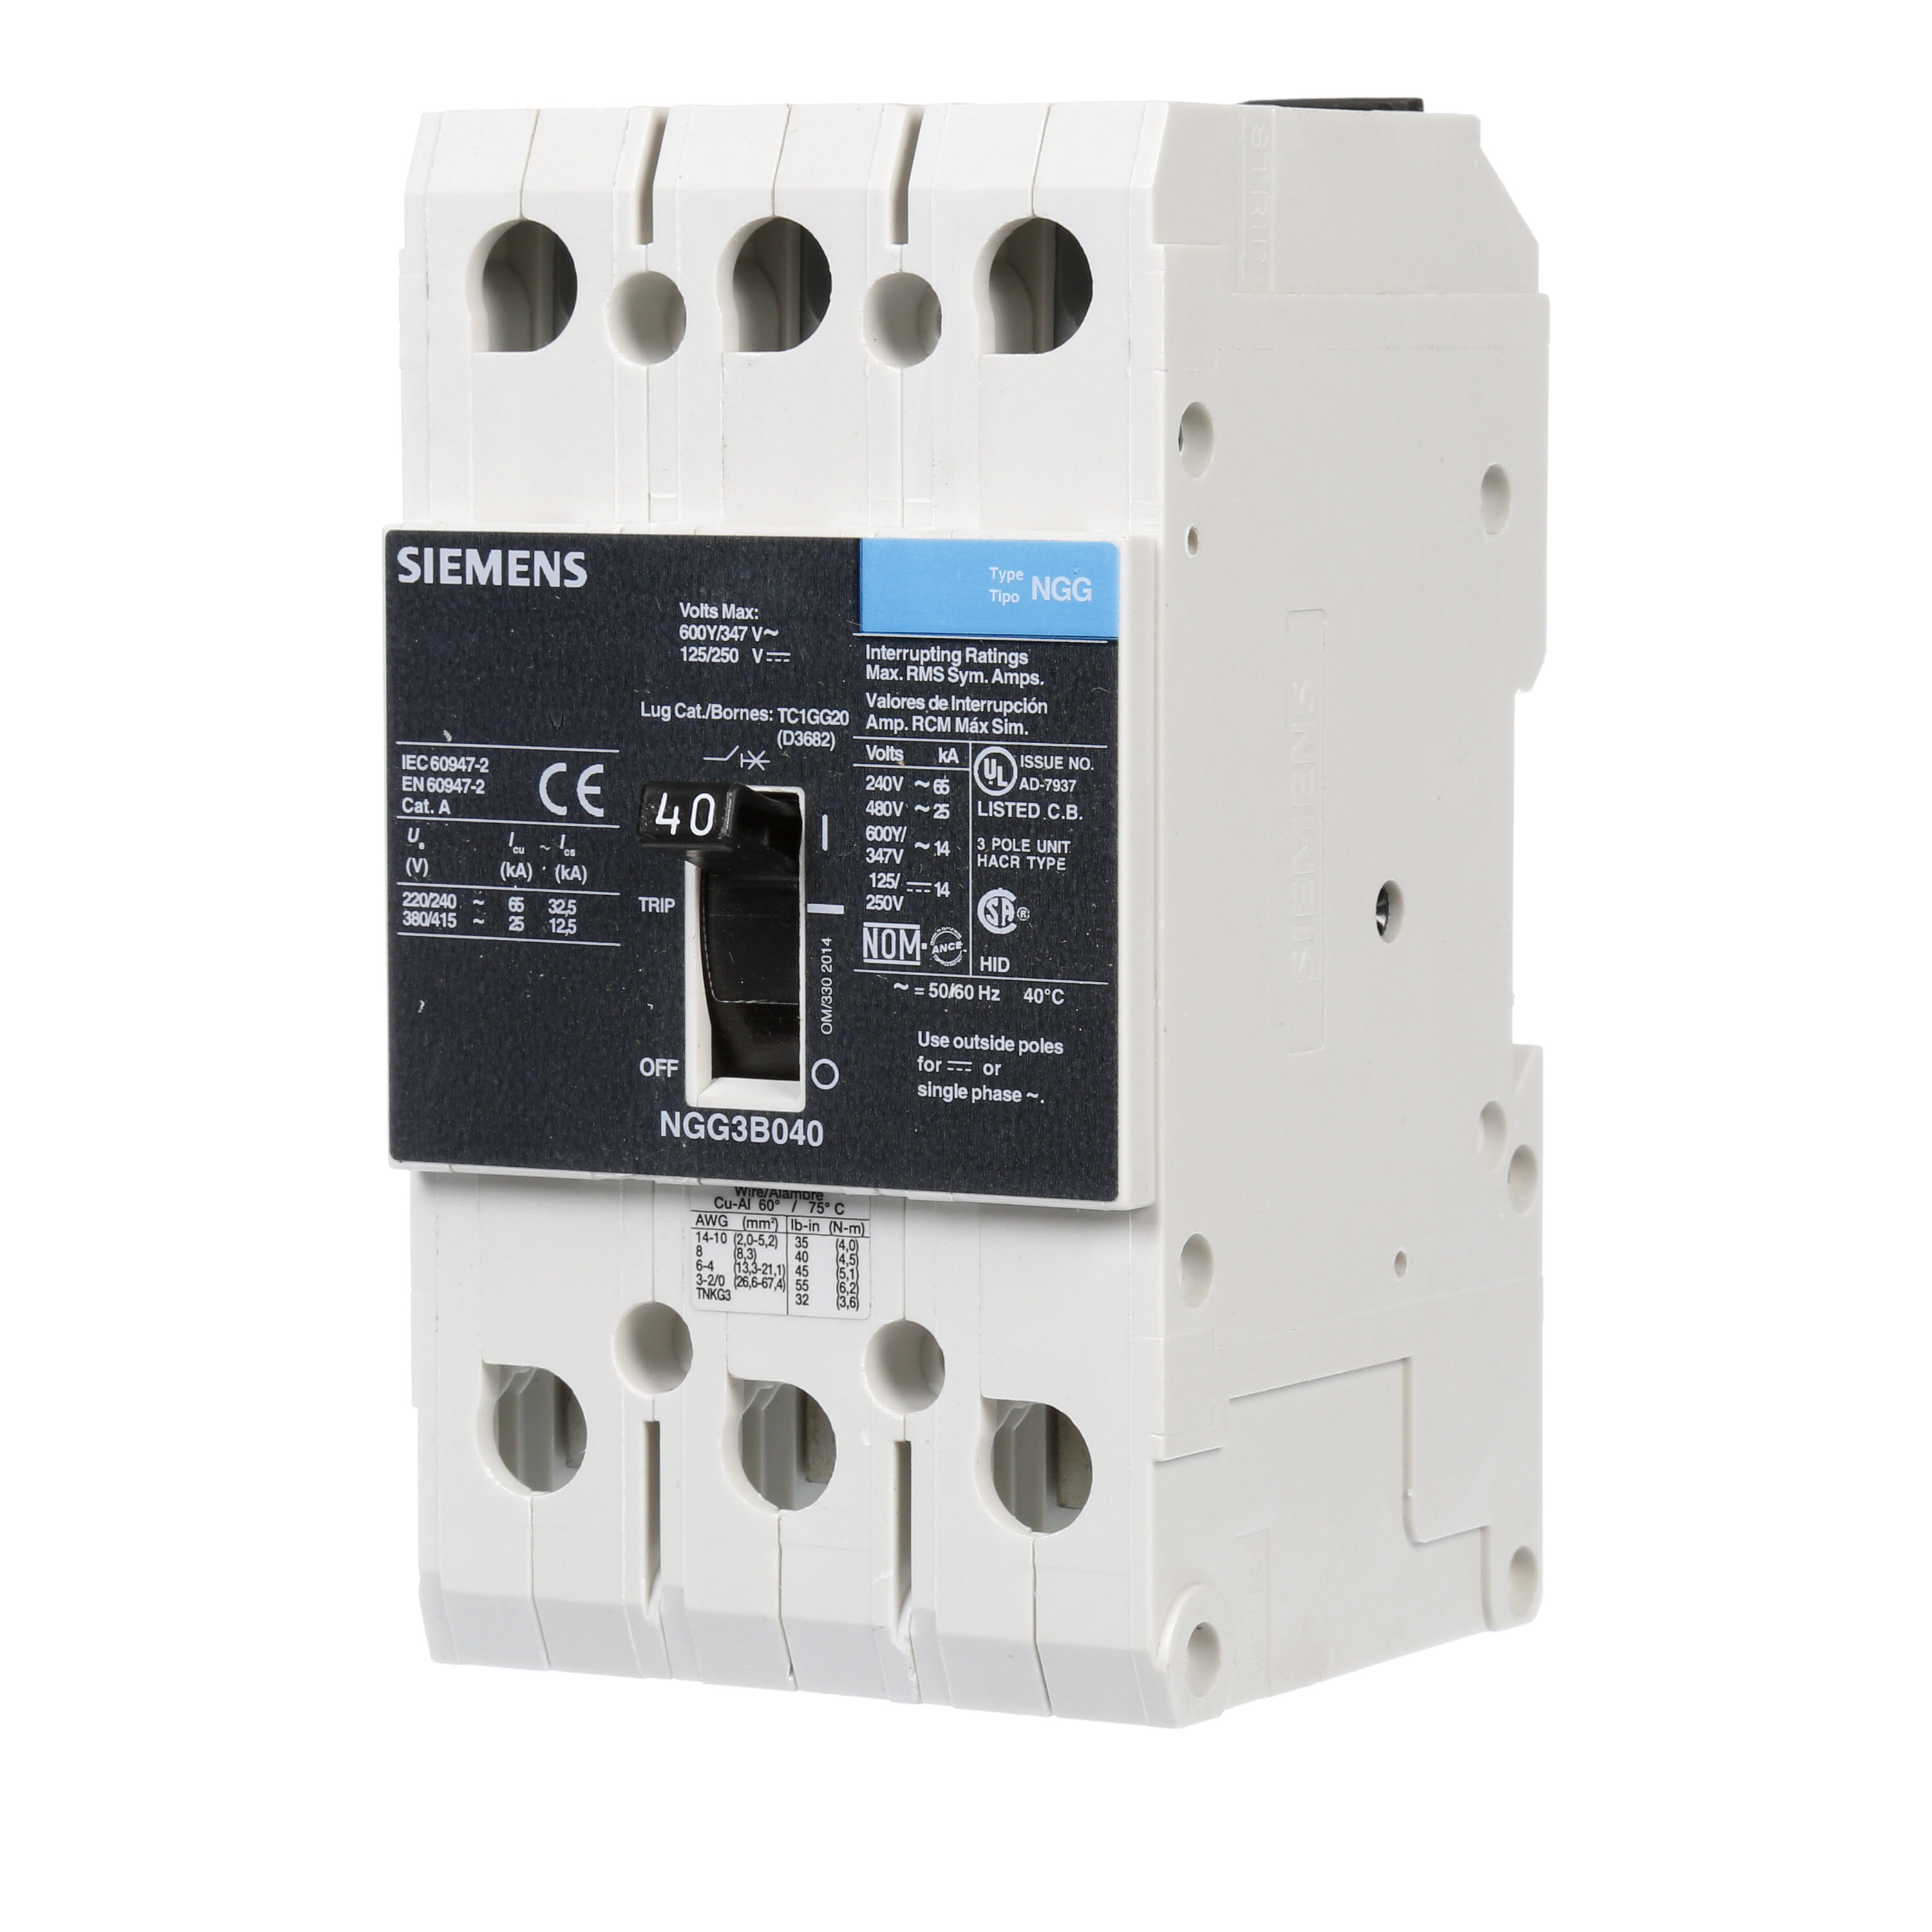 SIEMENS LOW VOLTAGE G FRAME CIRCUIT BREAKER WITH THERMAL - MAGNETIC TRIP. UL LISTED NGG FRAME WITH STANDARD BREAKING CAPACITY. 40A 3-POLE (14KAIC AT 600Y/347V)(25KAIC AT 480V). SPECIAL FEATURES MOUNTS ON DIN RAIL / SCREW, LINE AND LOAD SIDE LUGS (TC1GG20) WIRE RANGE 8 - 1/0 AWS (CU/AL). DIMENSIONS (W x H x D) IN 3 x 5.4 x 2.8.